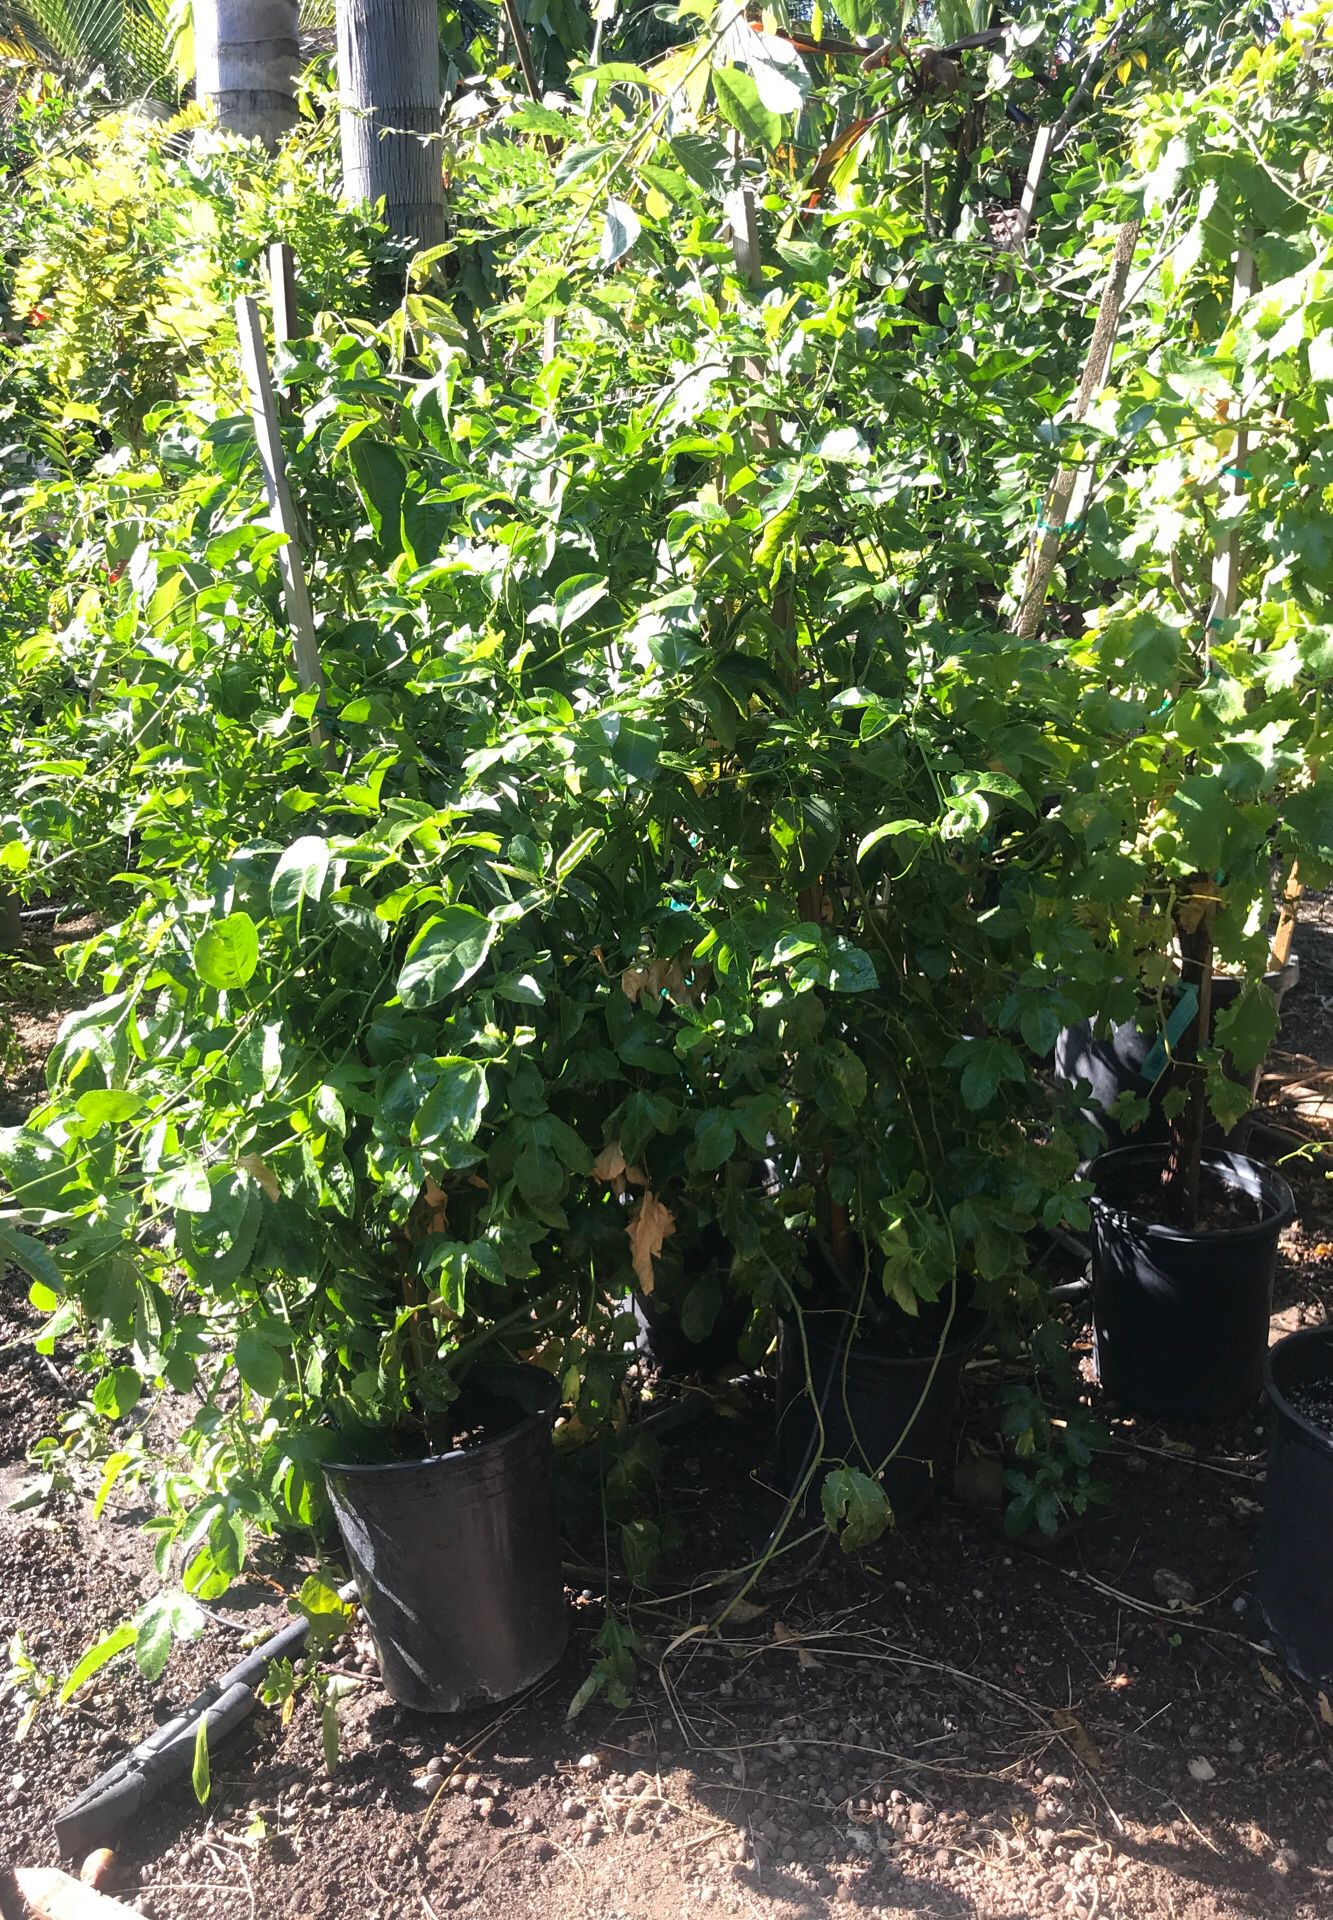 Passion fruit trees